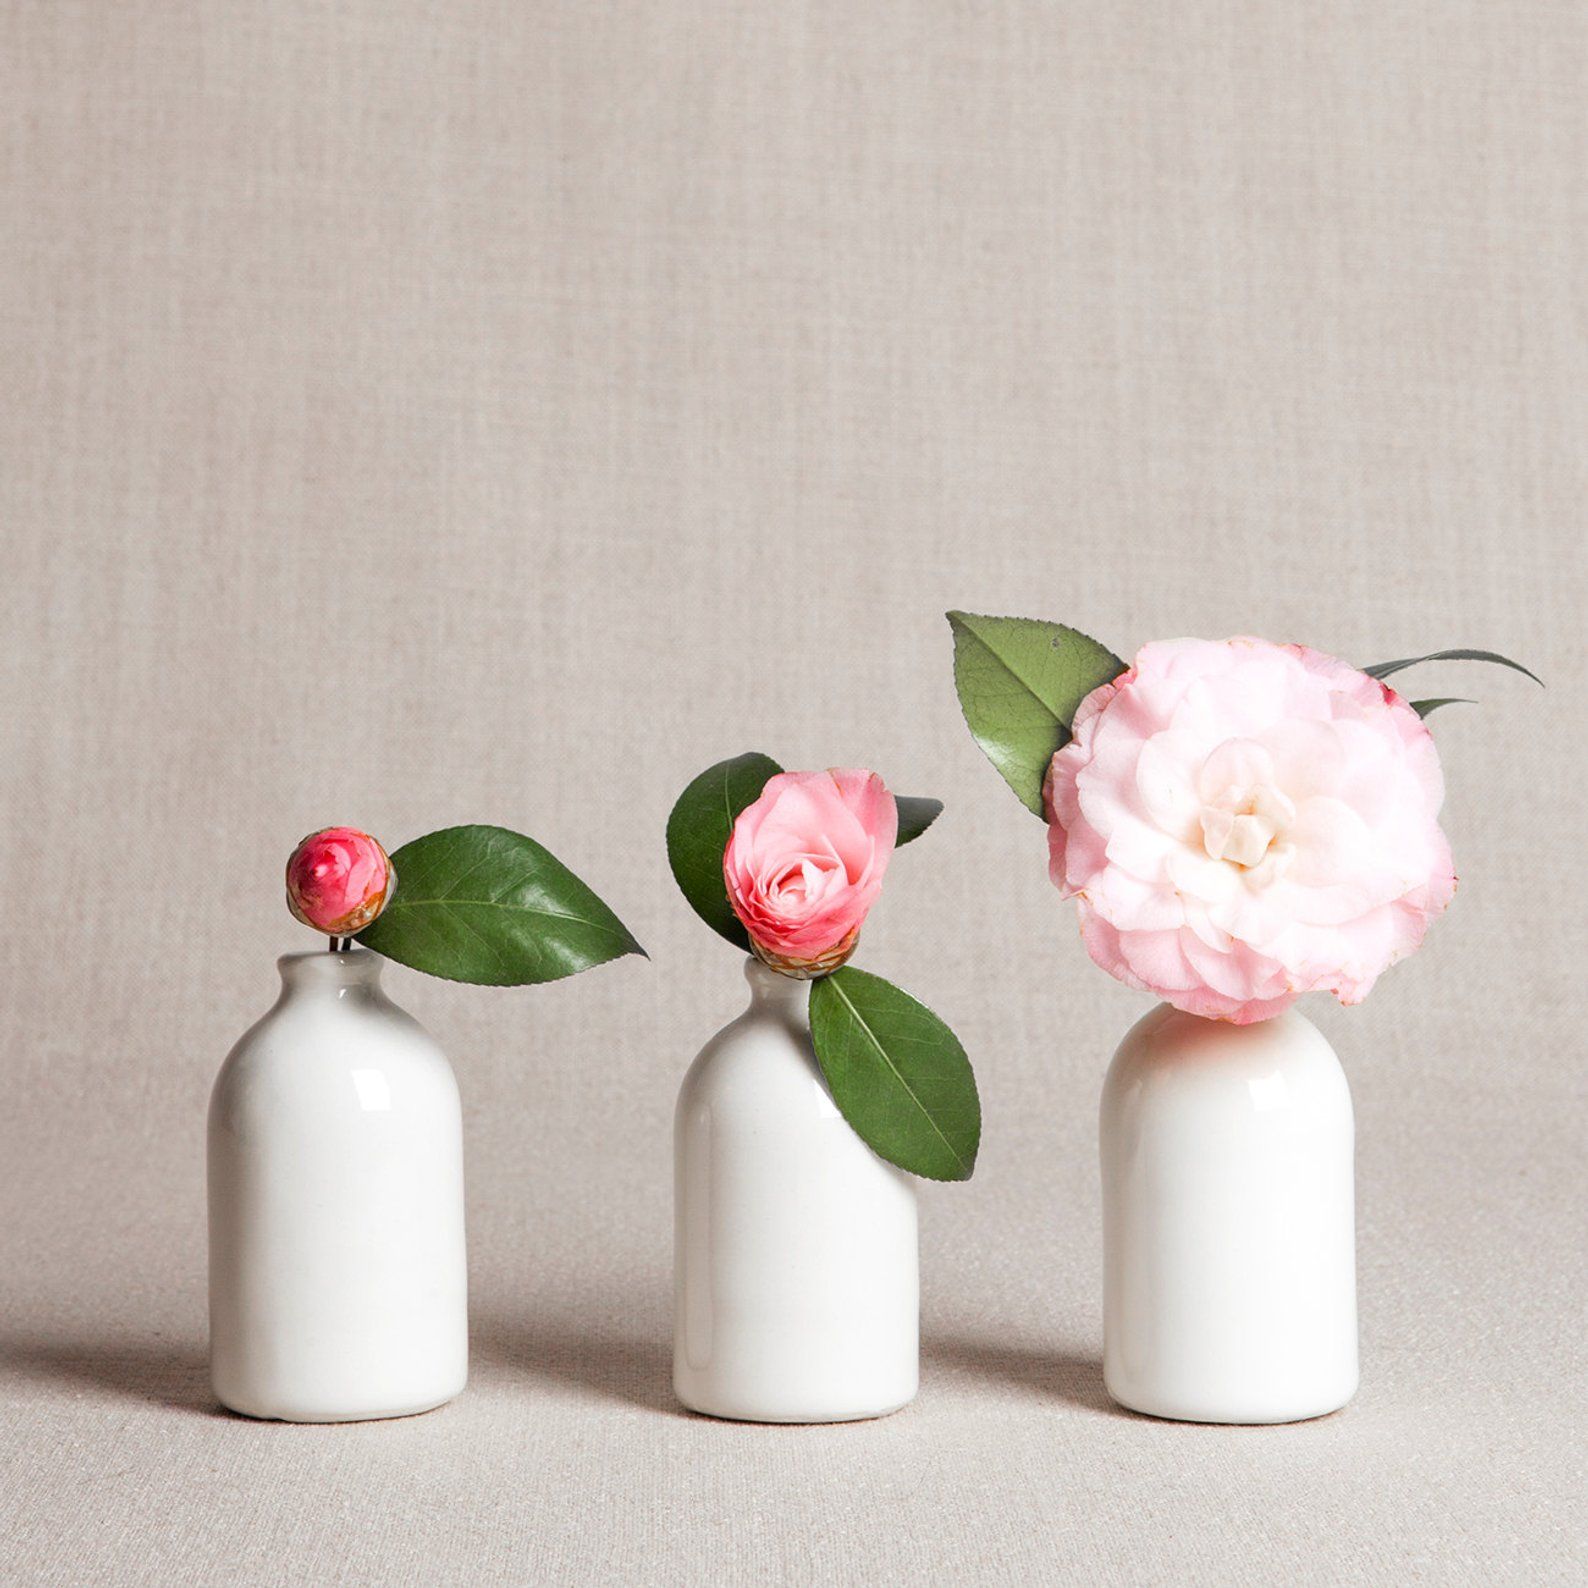 Matching Vases with Attractive Flowers